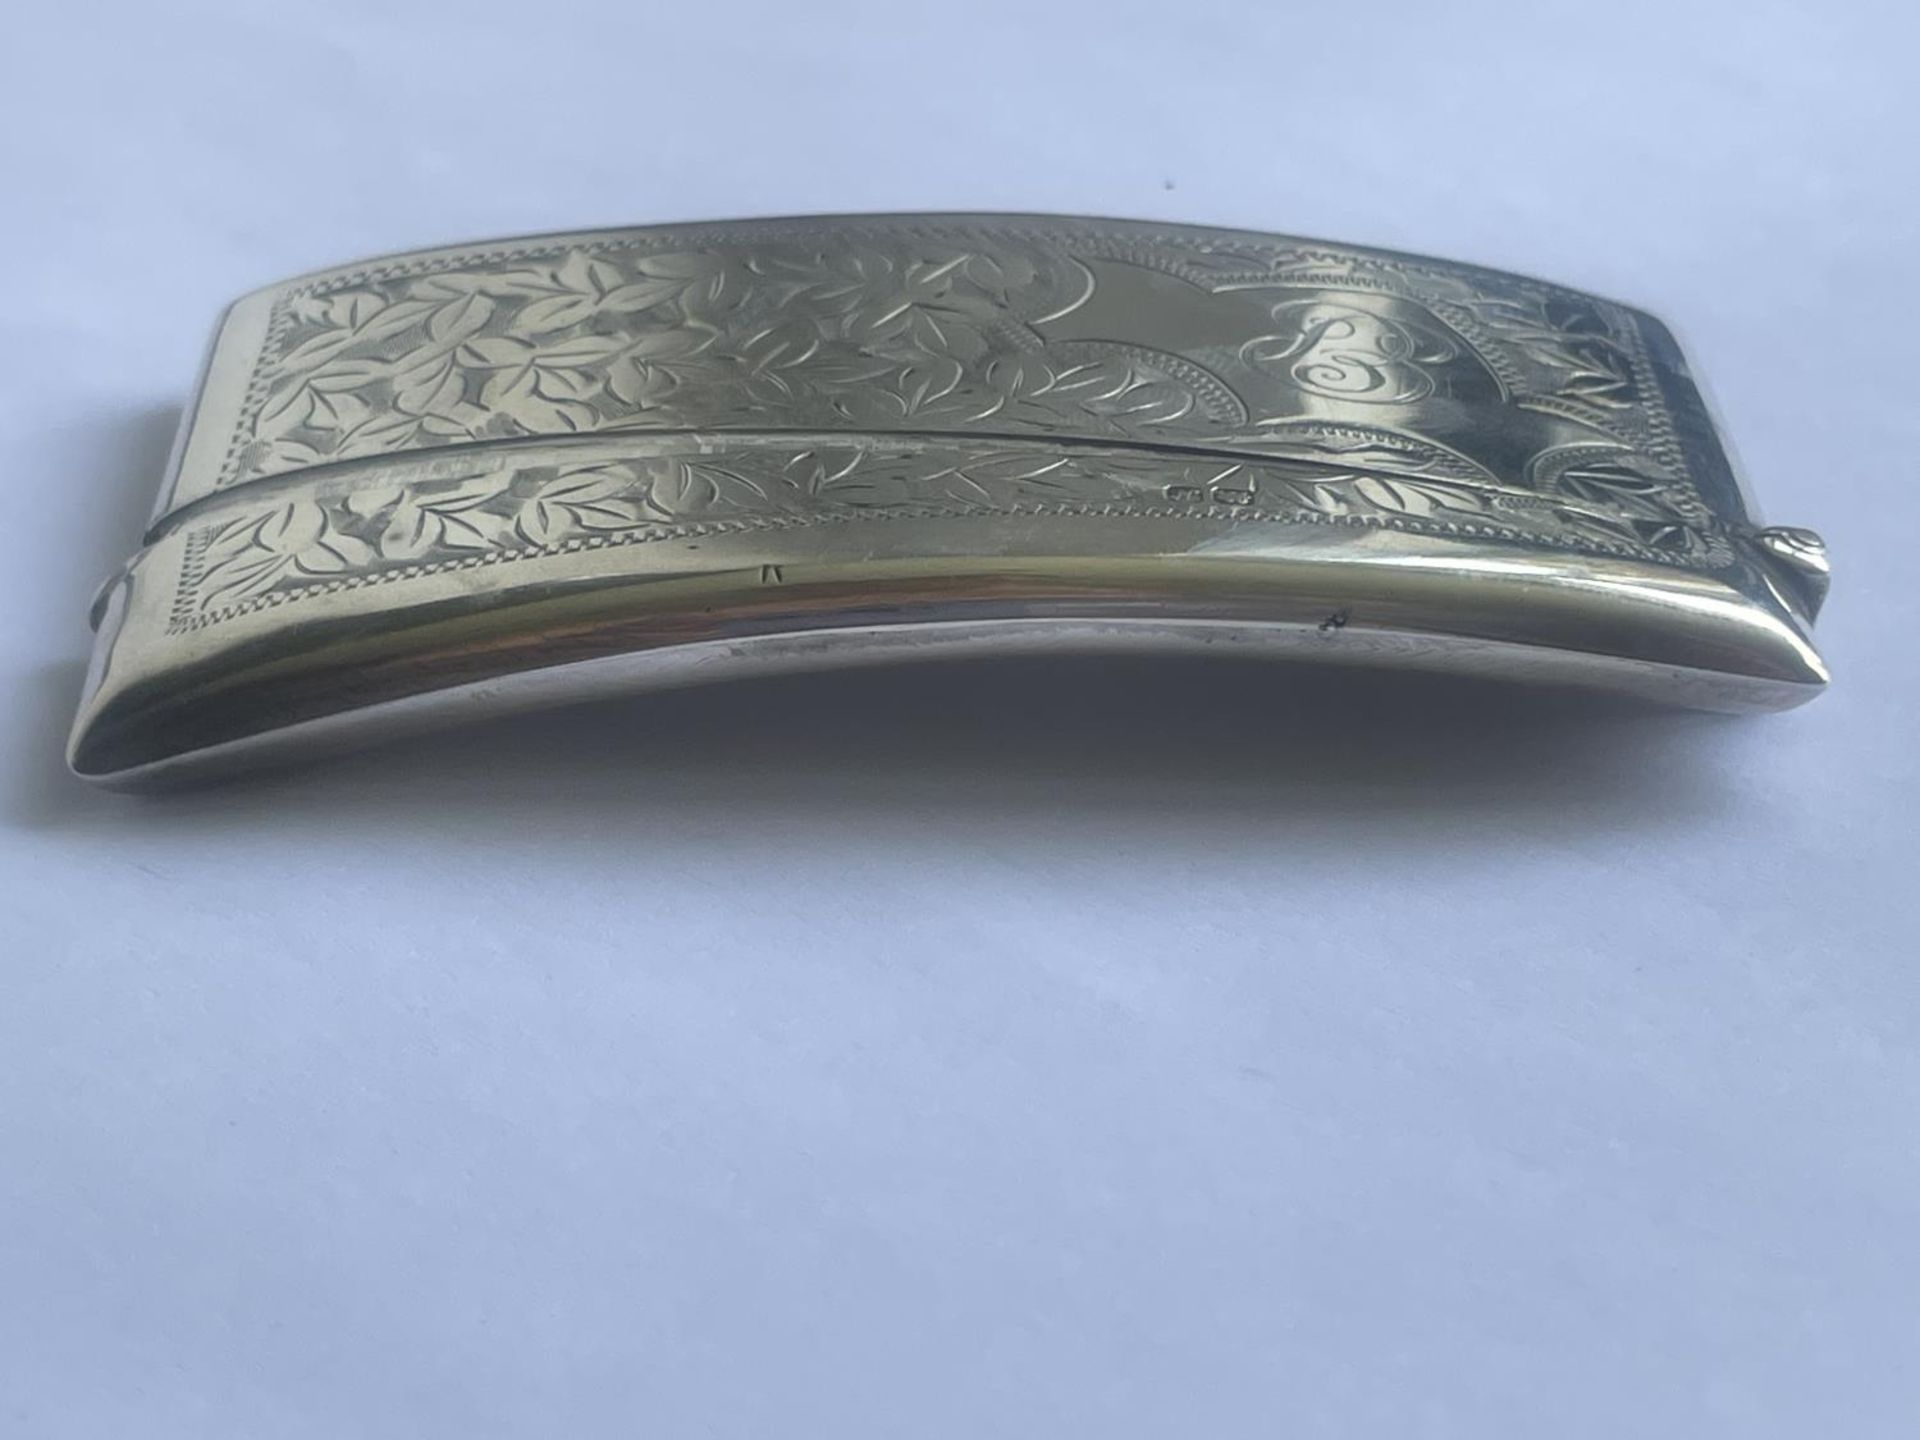 A HALLMARKED CHESTER SILVER CARD CASE GROSS WEIGHT 30 GRAMS - Image 5 of 5